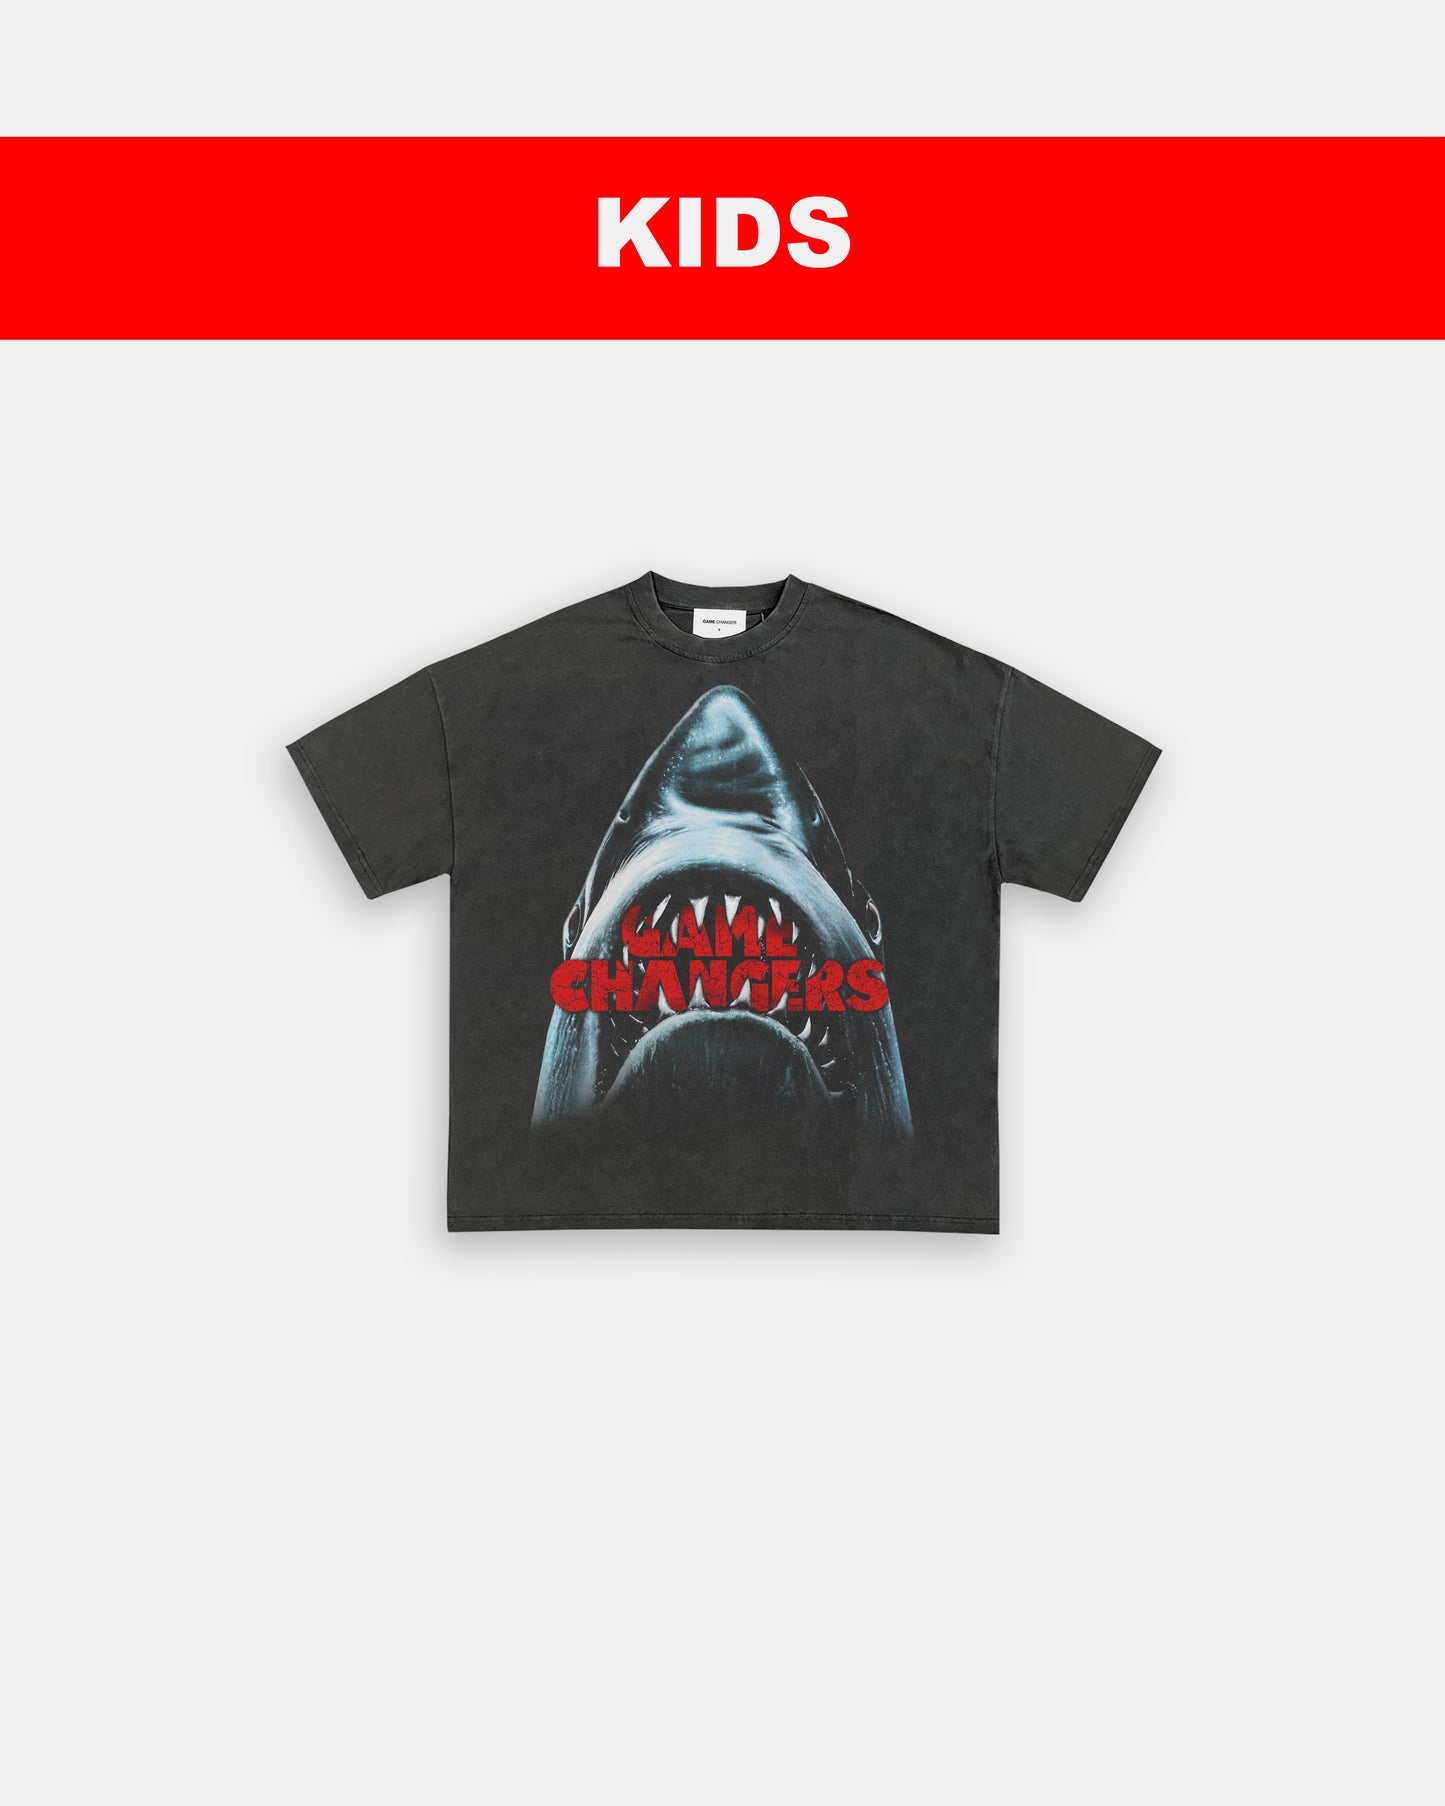 JAWS - FRONT ONLY - KIDS TEE